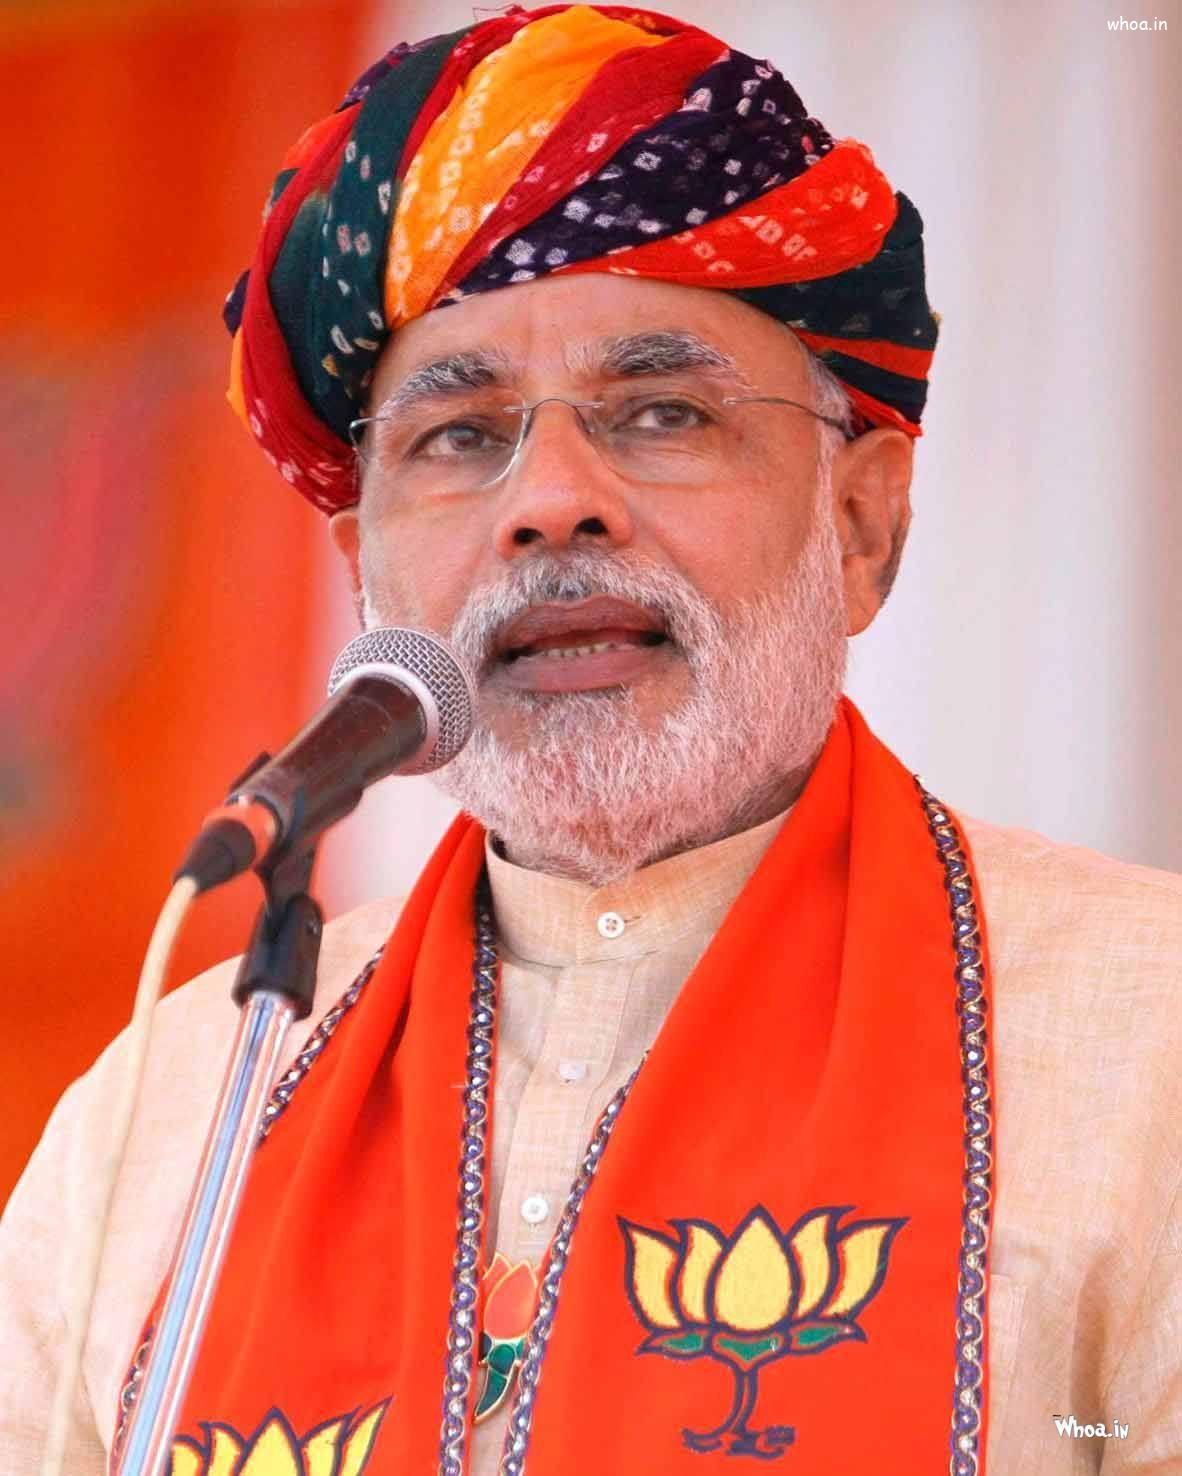 Indian Prime Minister Narendra Modi Images & Hd Wallpapers ...